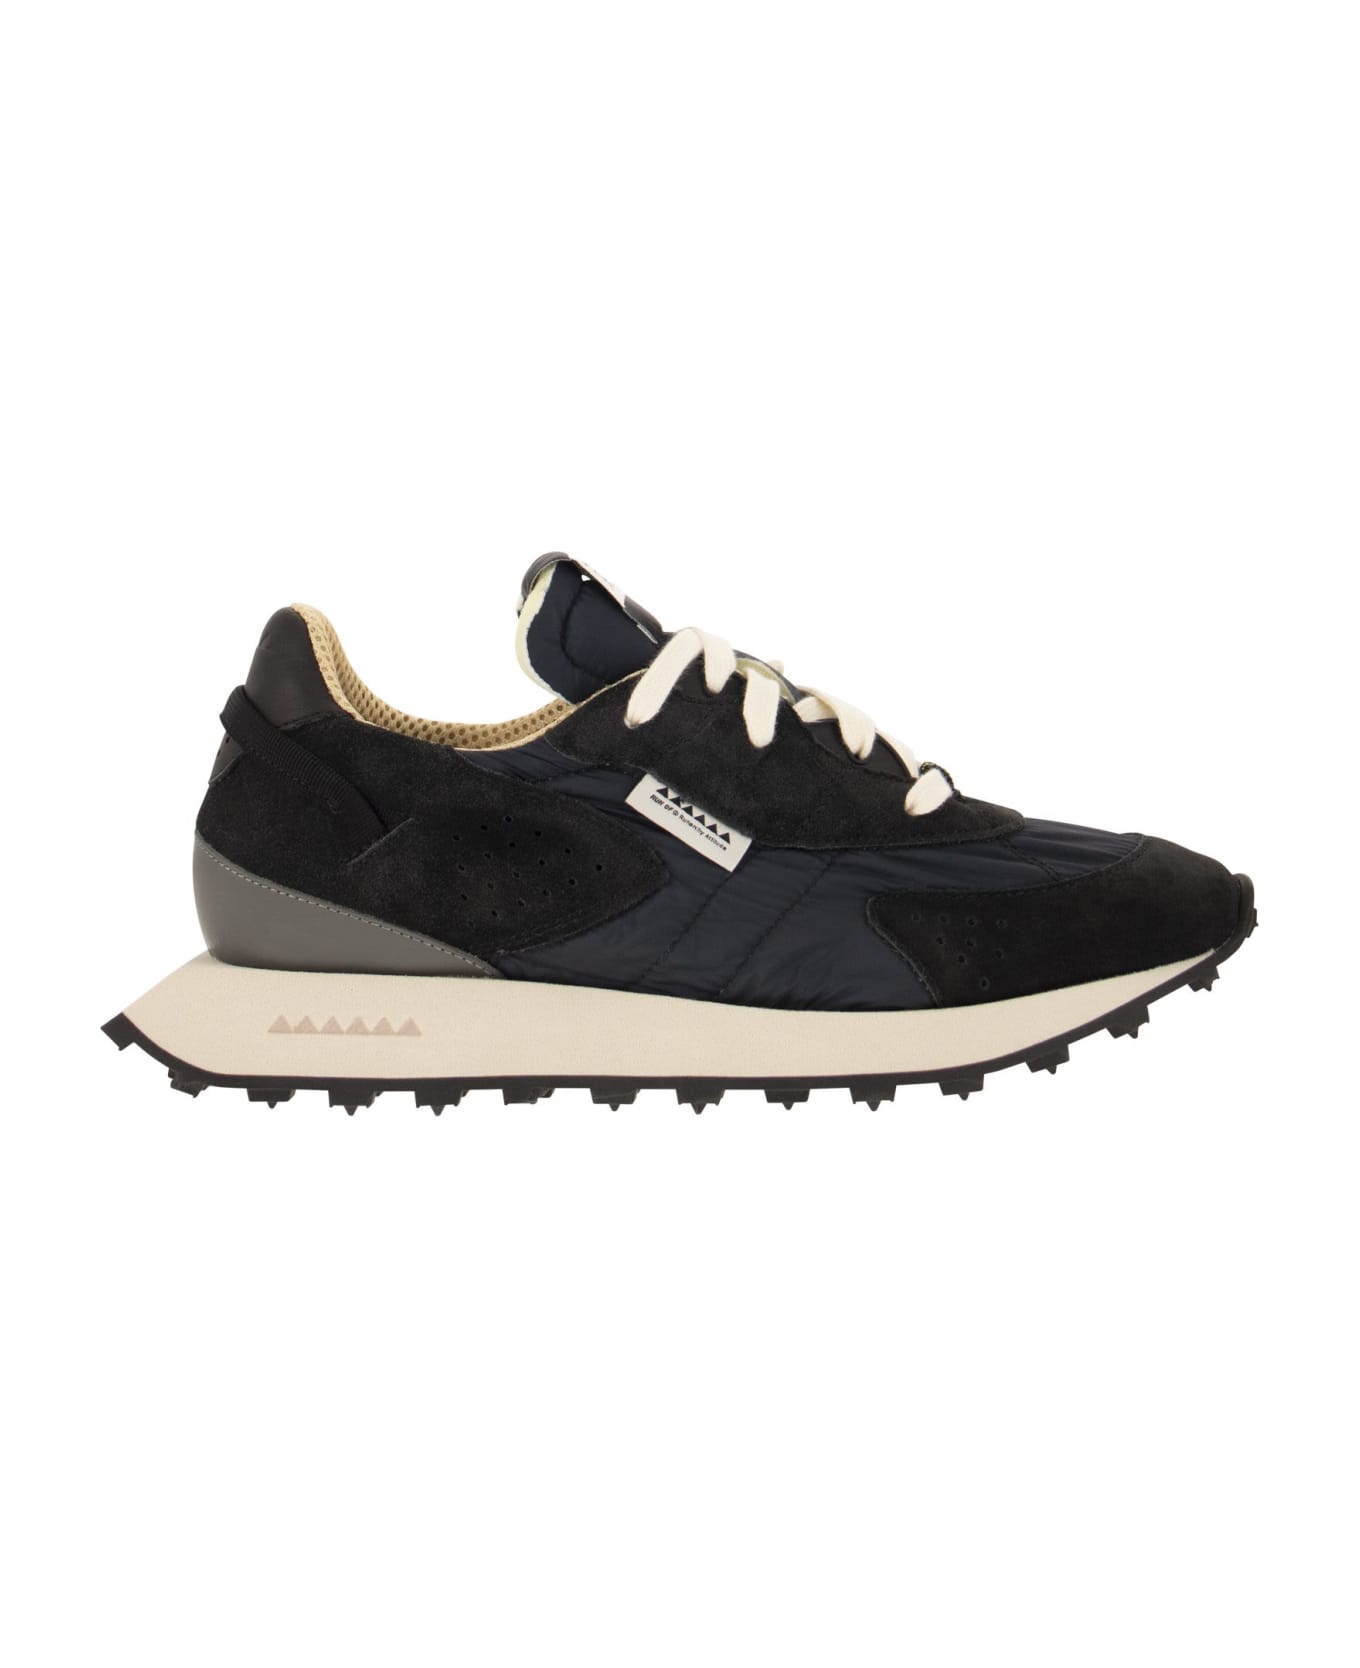 RUN OF Kripto M - Suede And Nylon Trainers - Blue